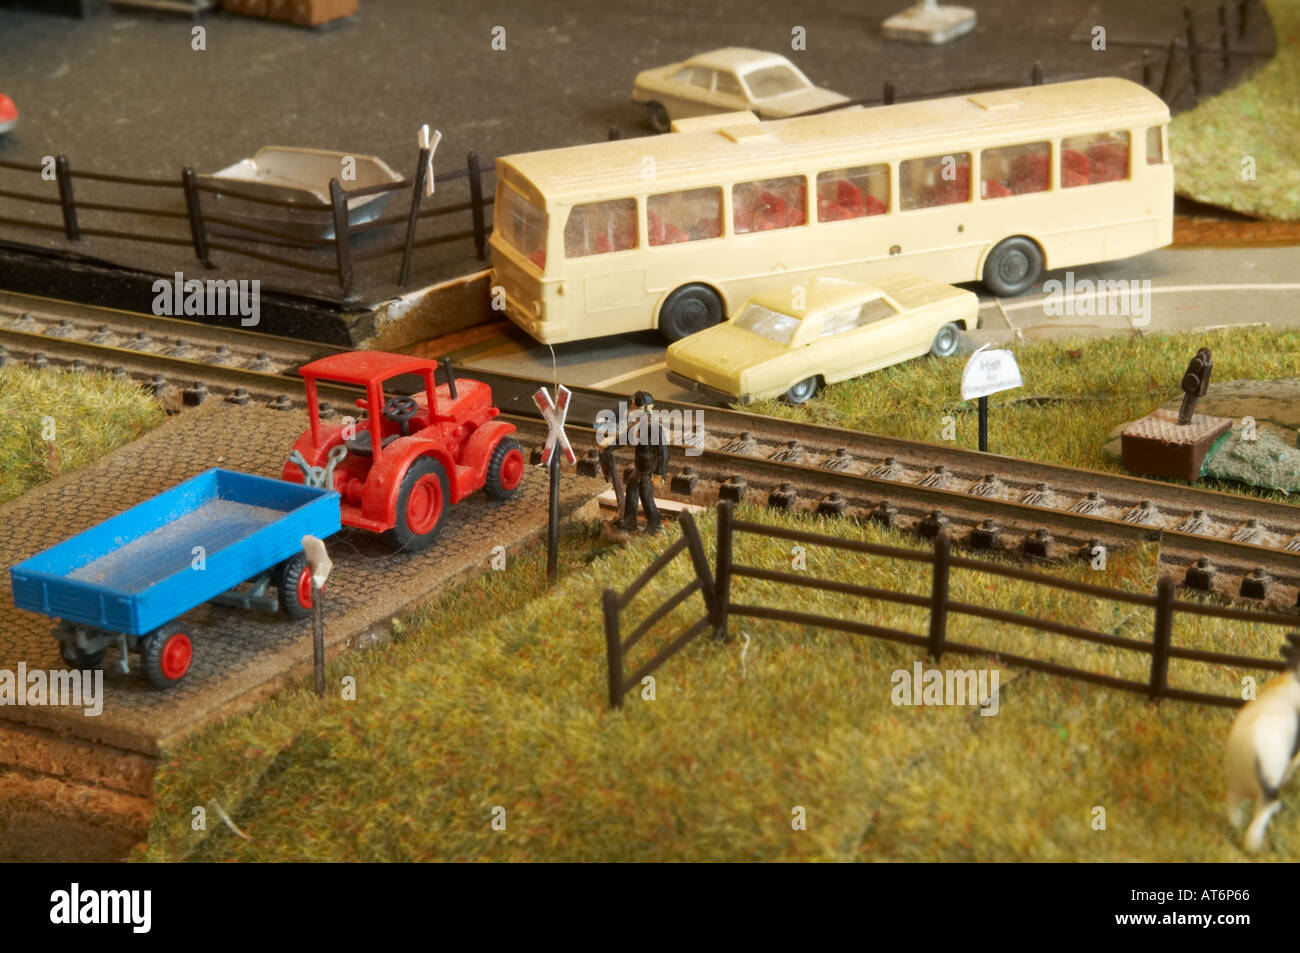 train set model railway scale toy trainset enthusiast hobby small electric train set model railway scale toy trainset enthusiast Stock Photo